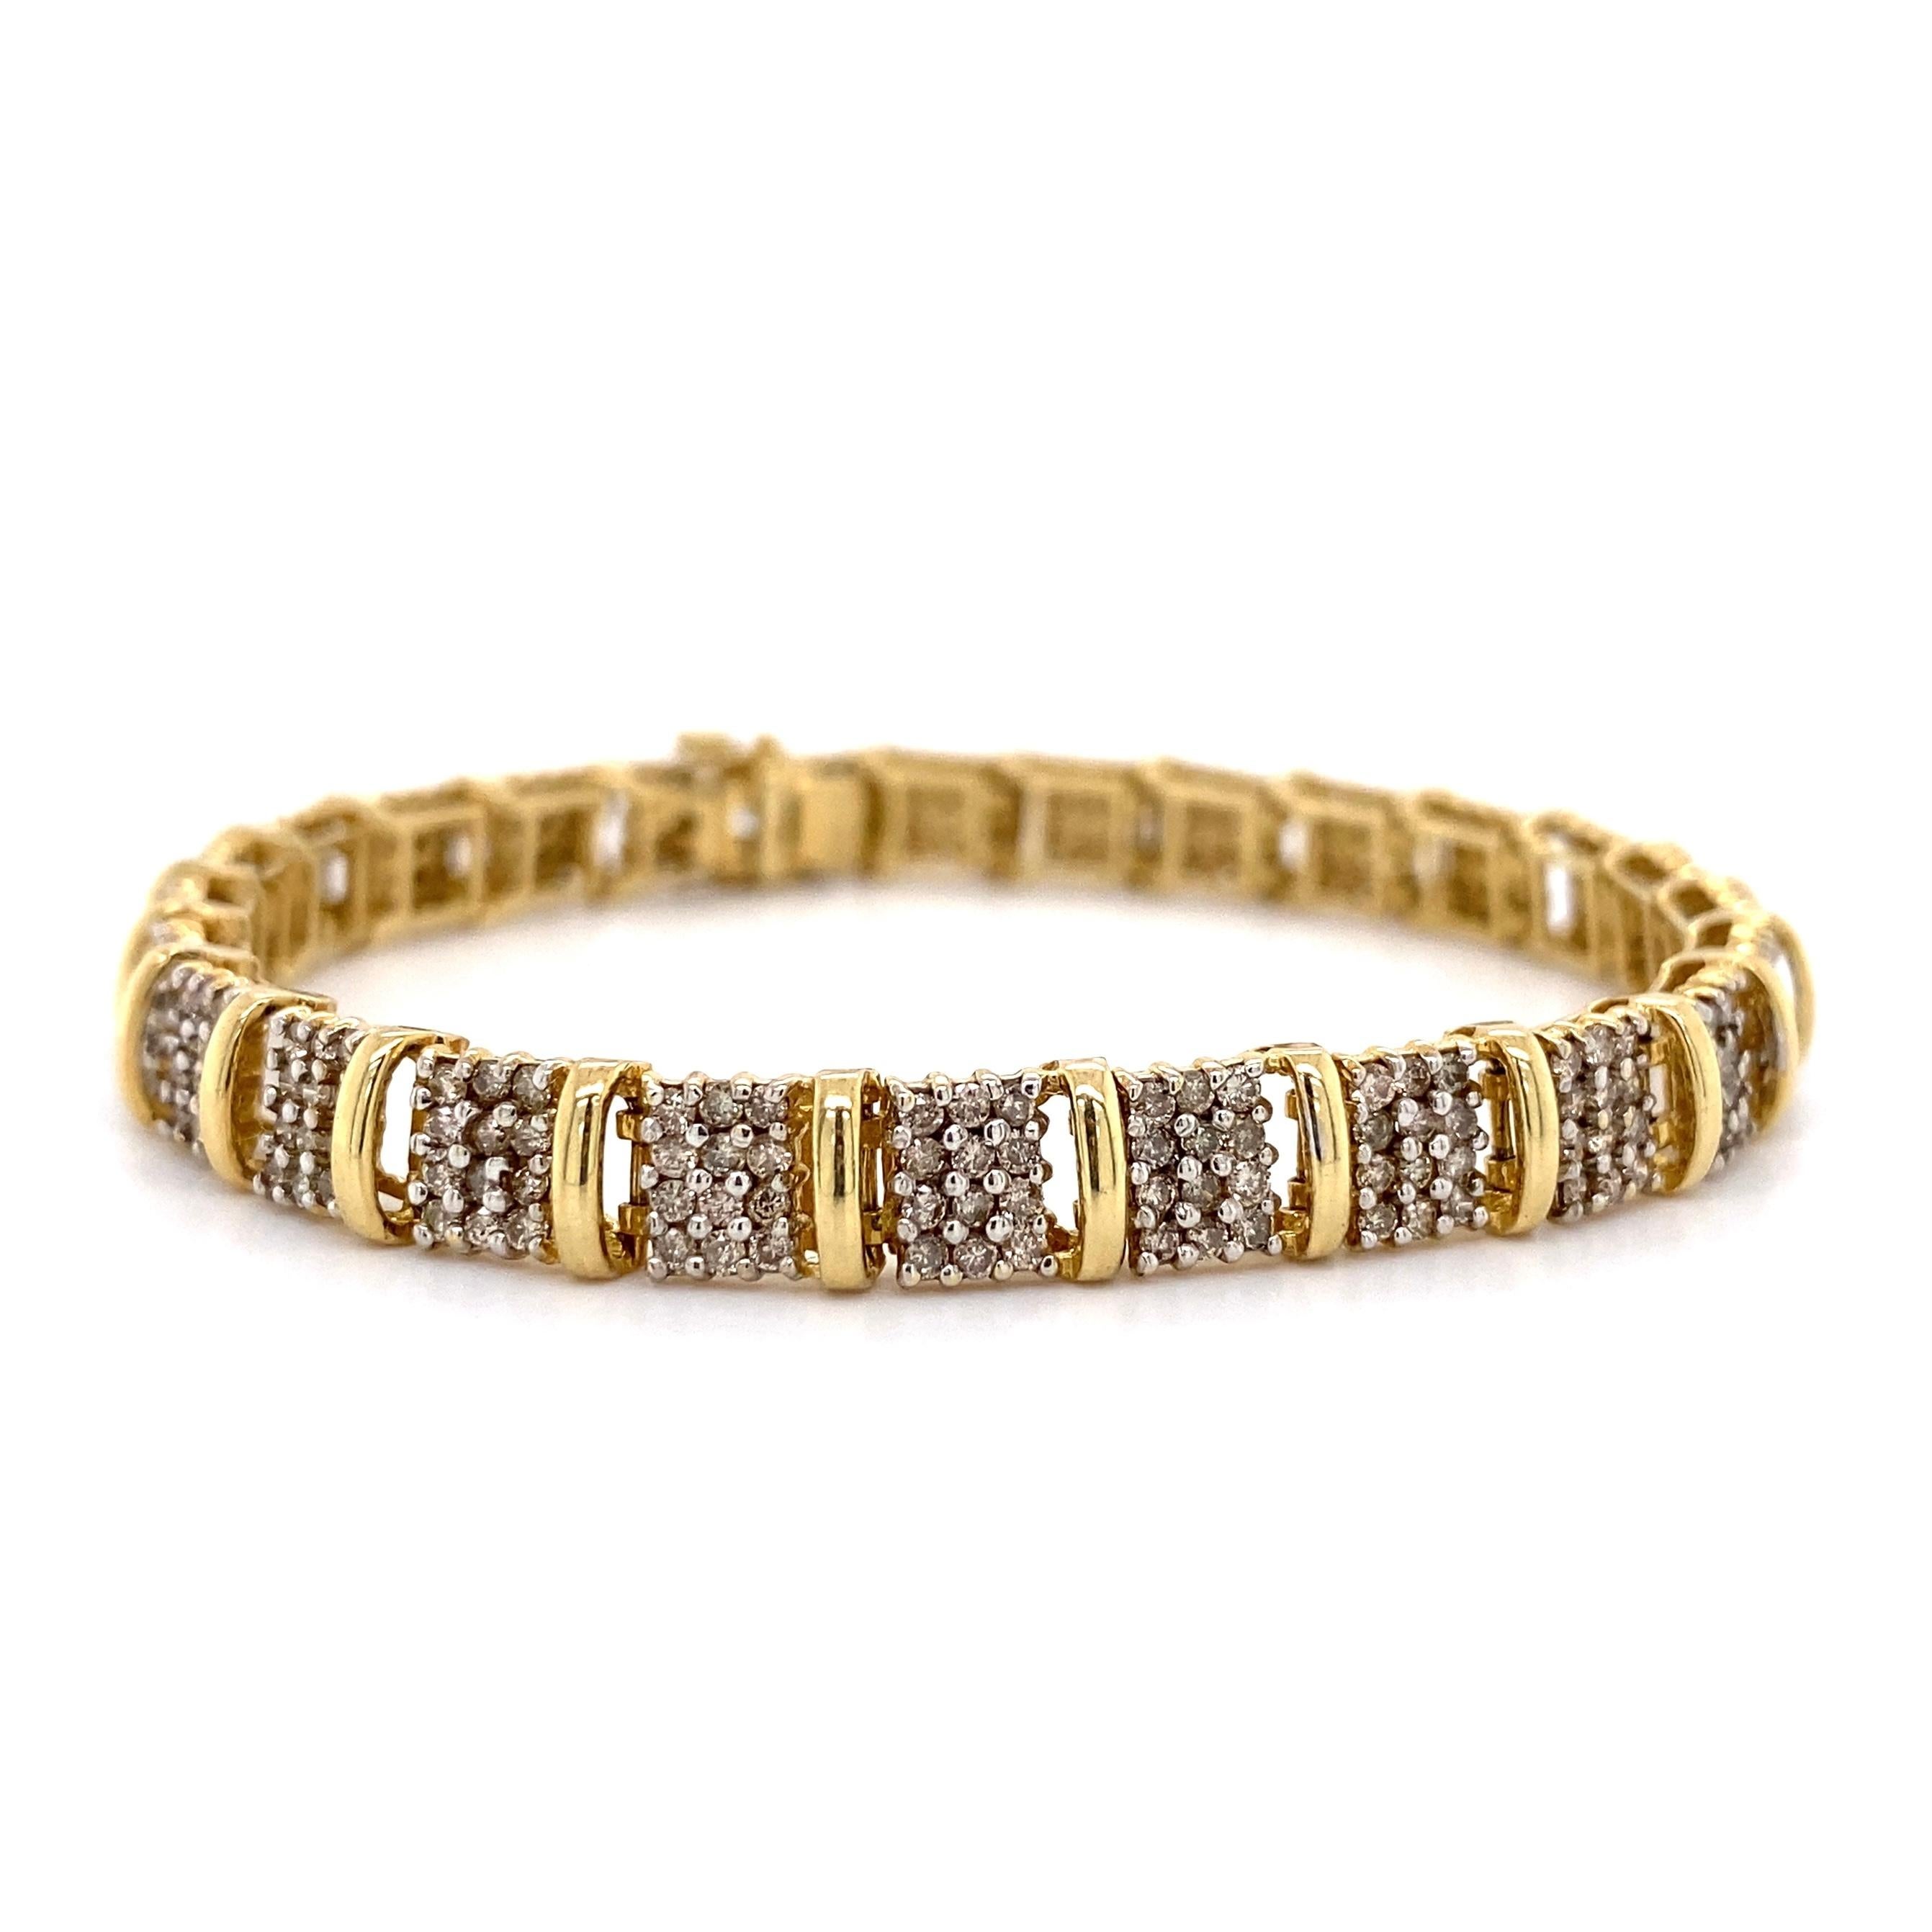 Simply Beautiful and Finely Detailed Gold Link Bracelet with alternating Diamond spacer links. Hand crafted in 14K Yellow Gold and Hand set with 312 round Diamonds approx. 2.34 total Carat weight. Approx. 7” long. Dimensions 7” l x 0.25” w x 0.16”